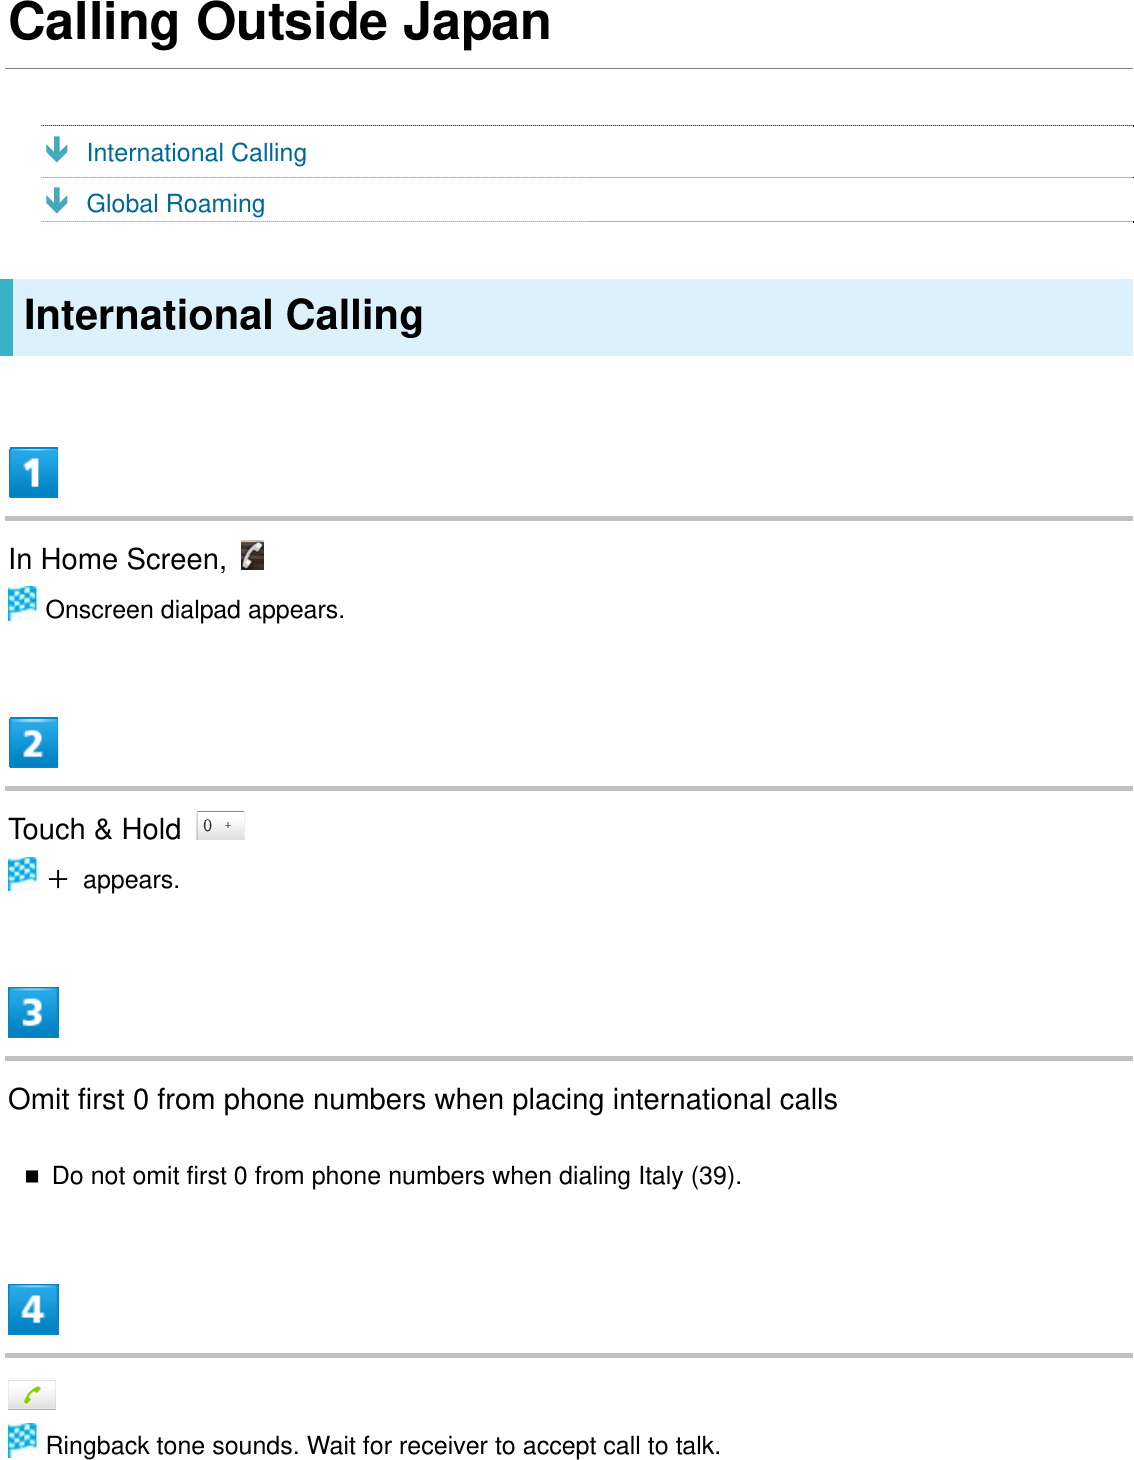 Calling Outside Japan Ð International Calling Ð Global Roaming International Calling  In Home Screen,    Onscreen dialpad appears.  Touch &amp; Hold    ＋ appears.  Omit first 0 from phone numbers when placing international calls  Do not omit first 0 from phone numbers when dialing Italy (39).    Ringback tone sounds. Wait for receiver to accept call to talk. 